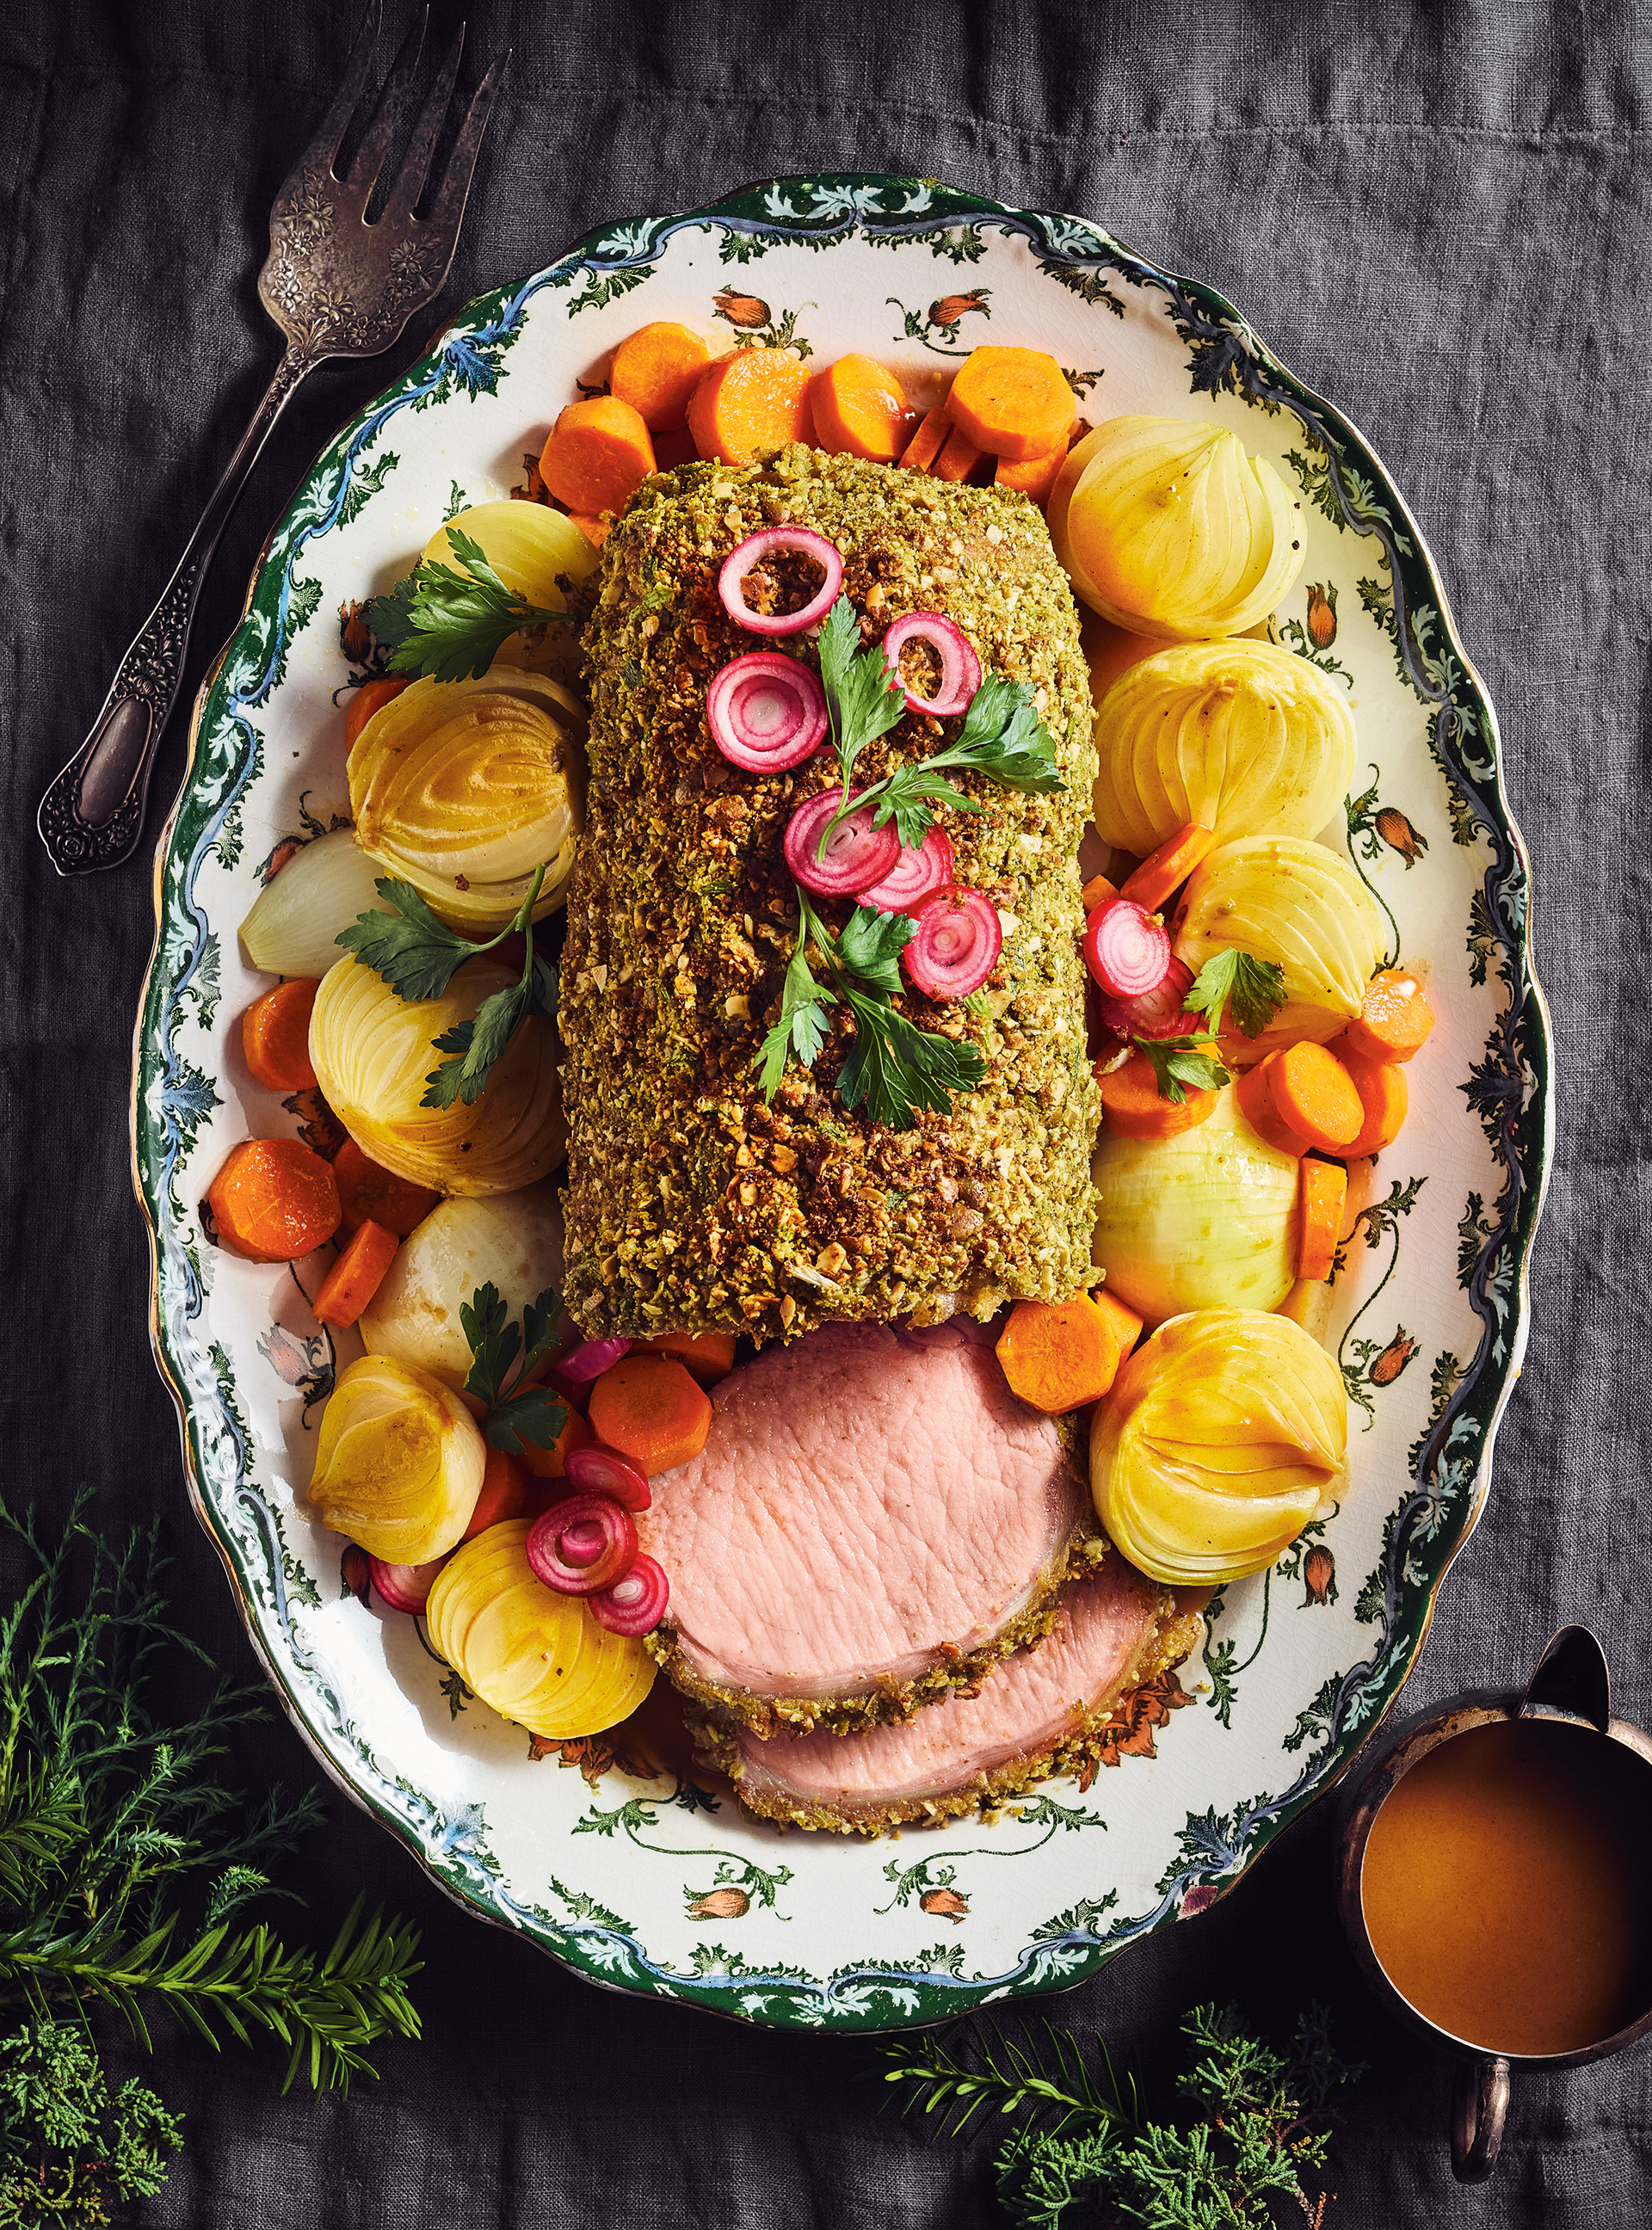 Pork Loin Roast with Pumpkin Seed Crust and Onions in Carrot Juice